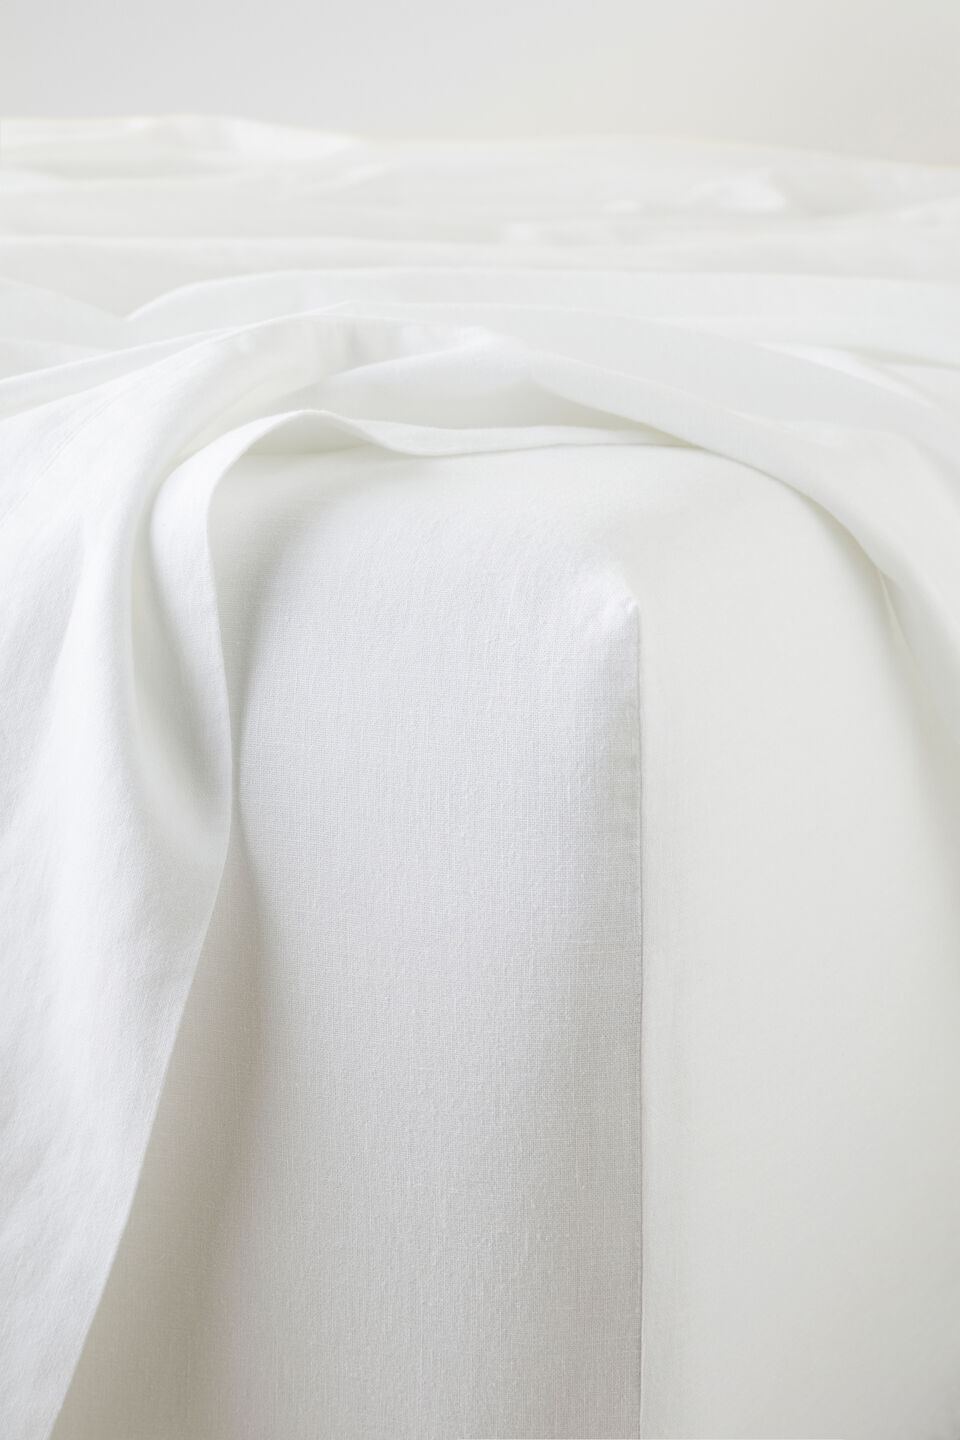 Alba Super King Fitted Sheet  White